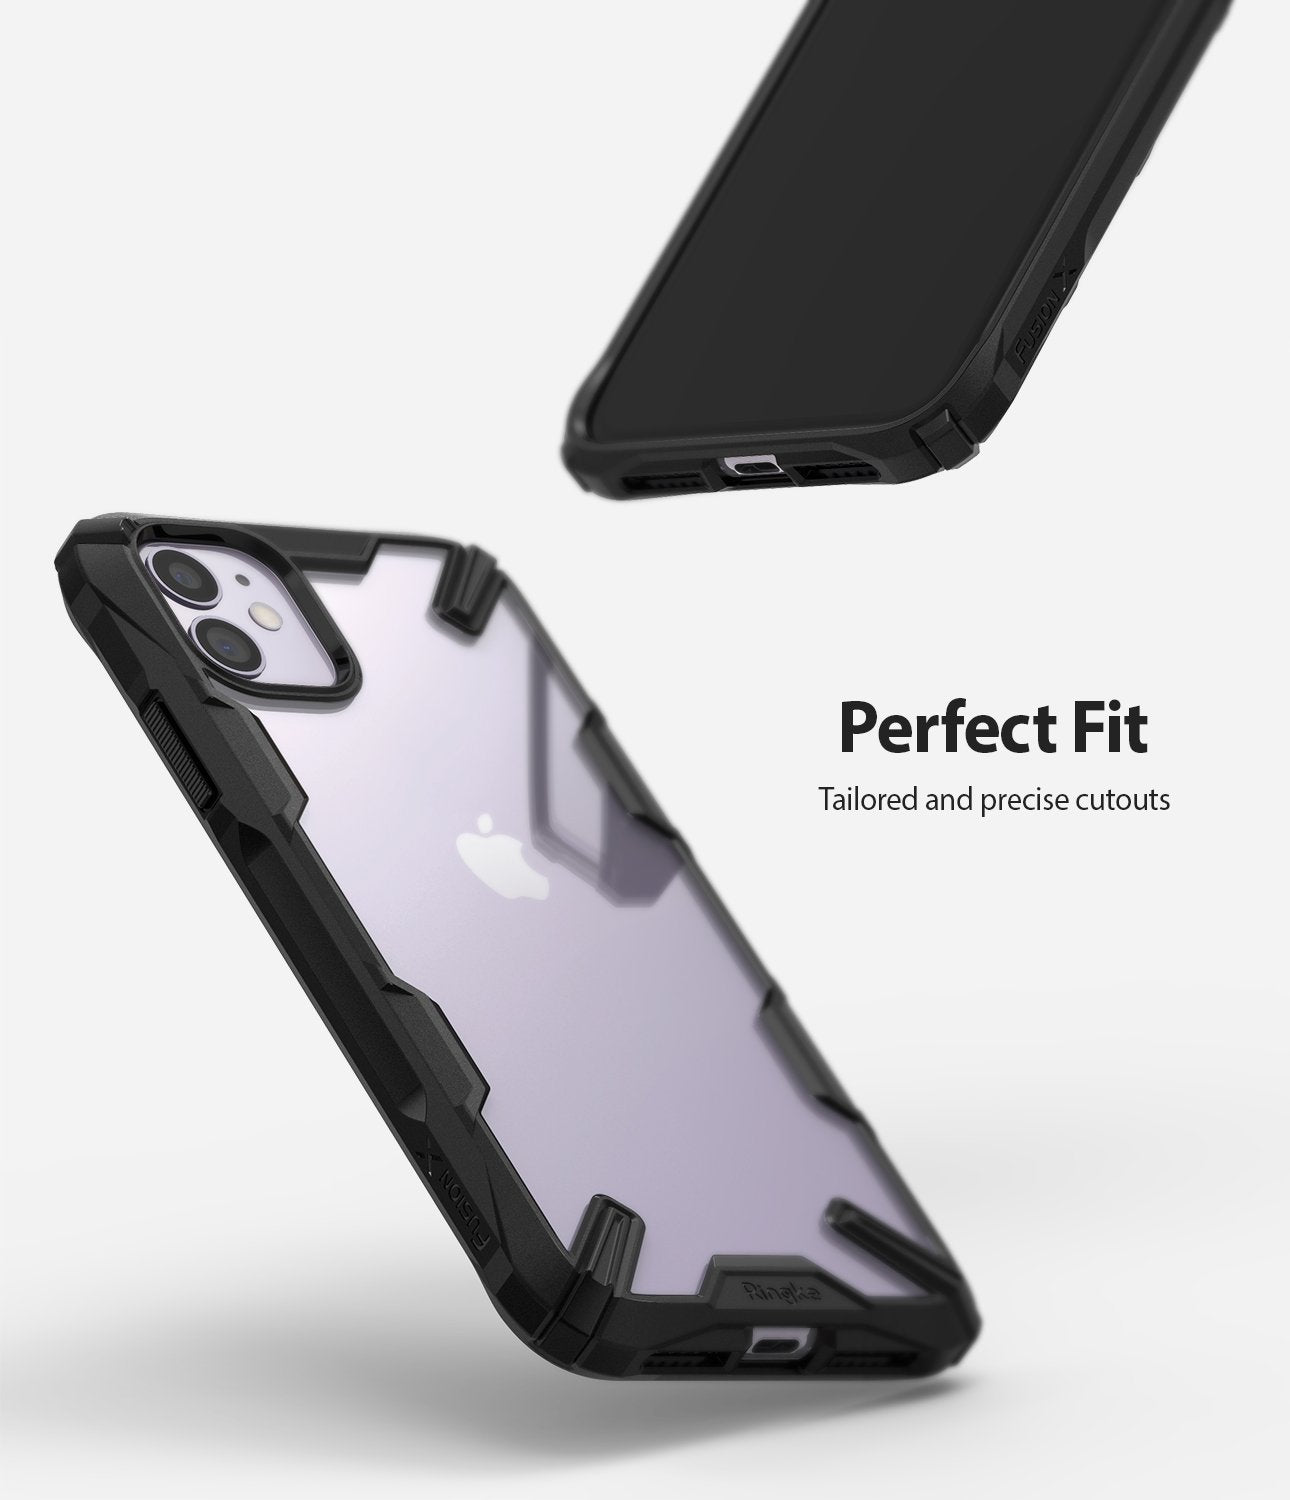 Ringke Fusion-X designed for iPhone 11 Perfect Fit